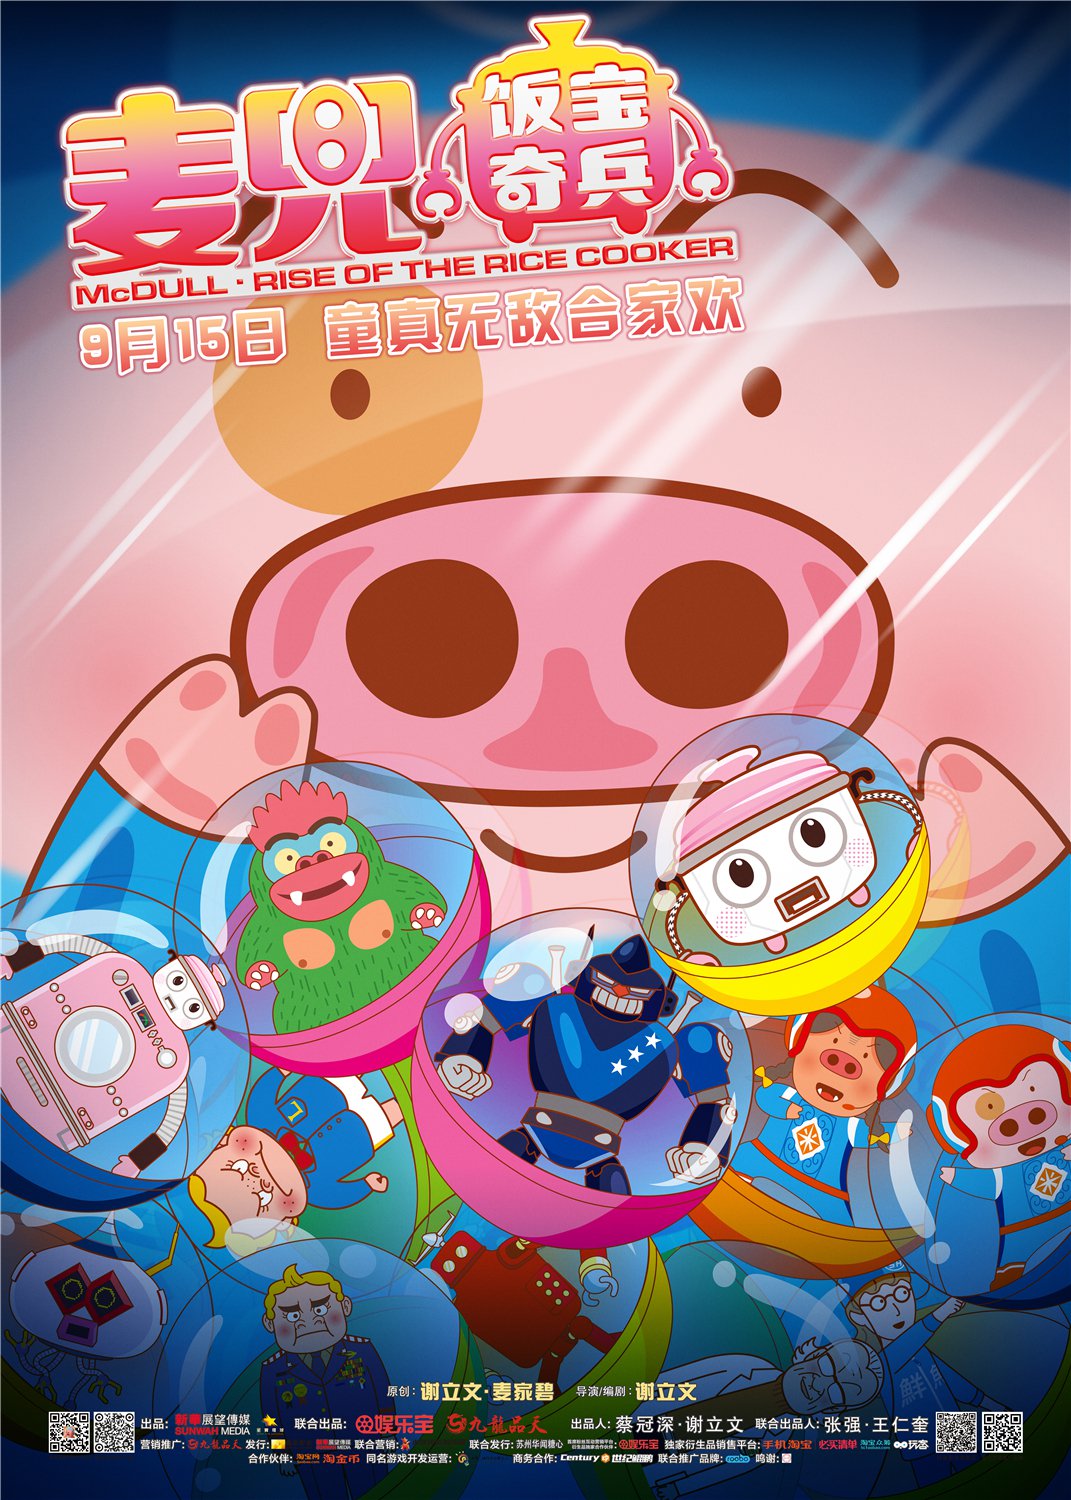 McDull_-_Rise_of_the_Rice_Cooker